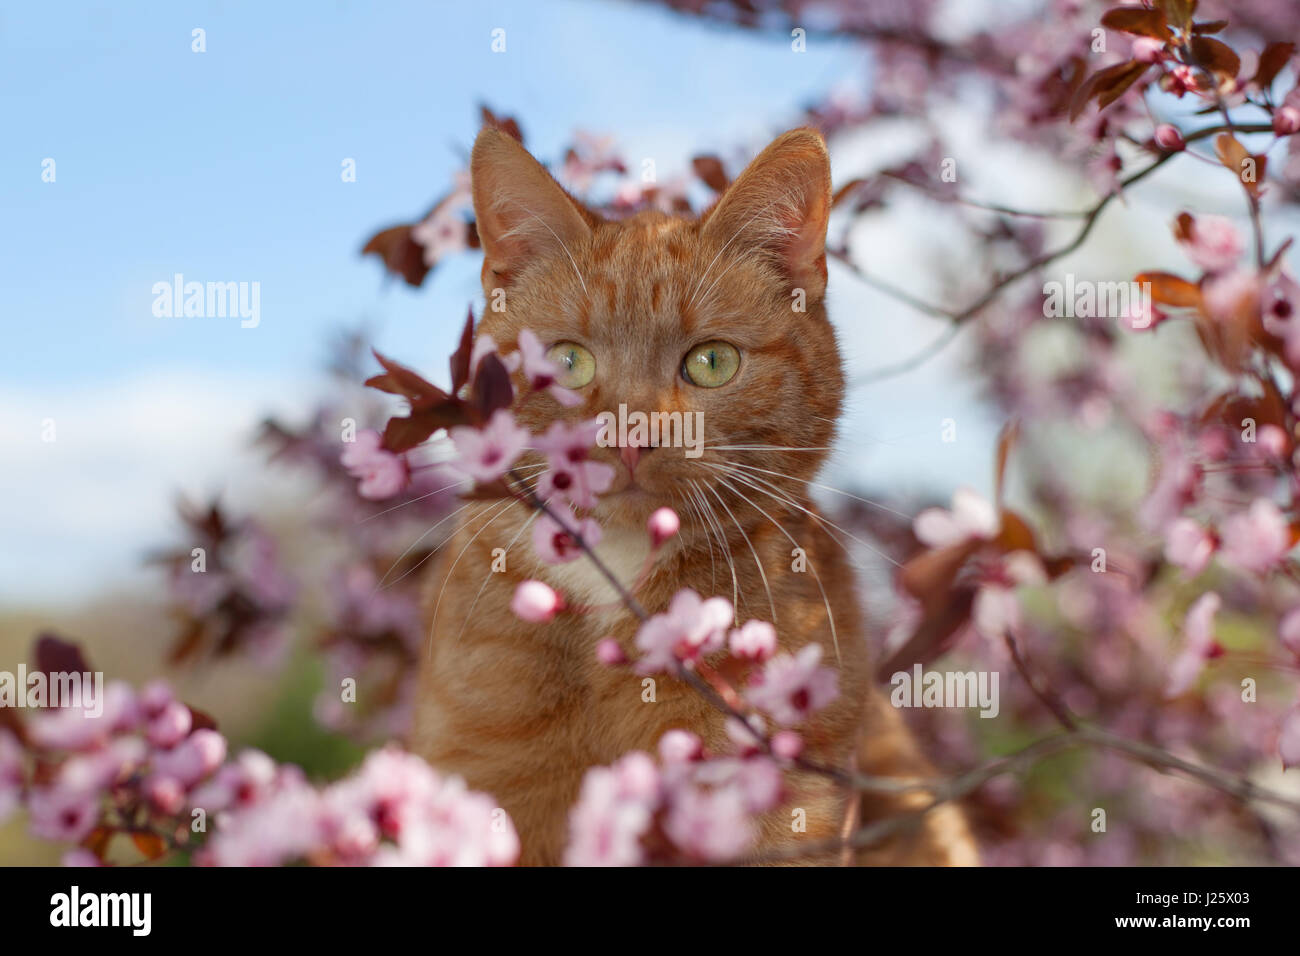 Red cat in flowers Stock Photo